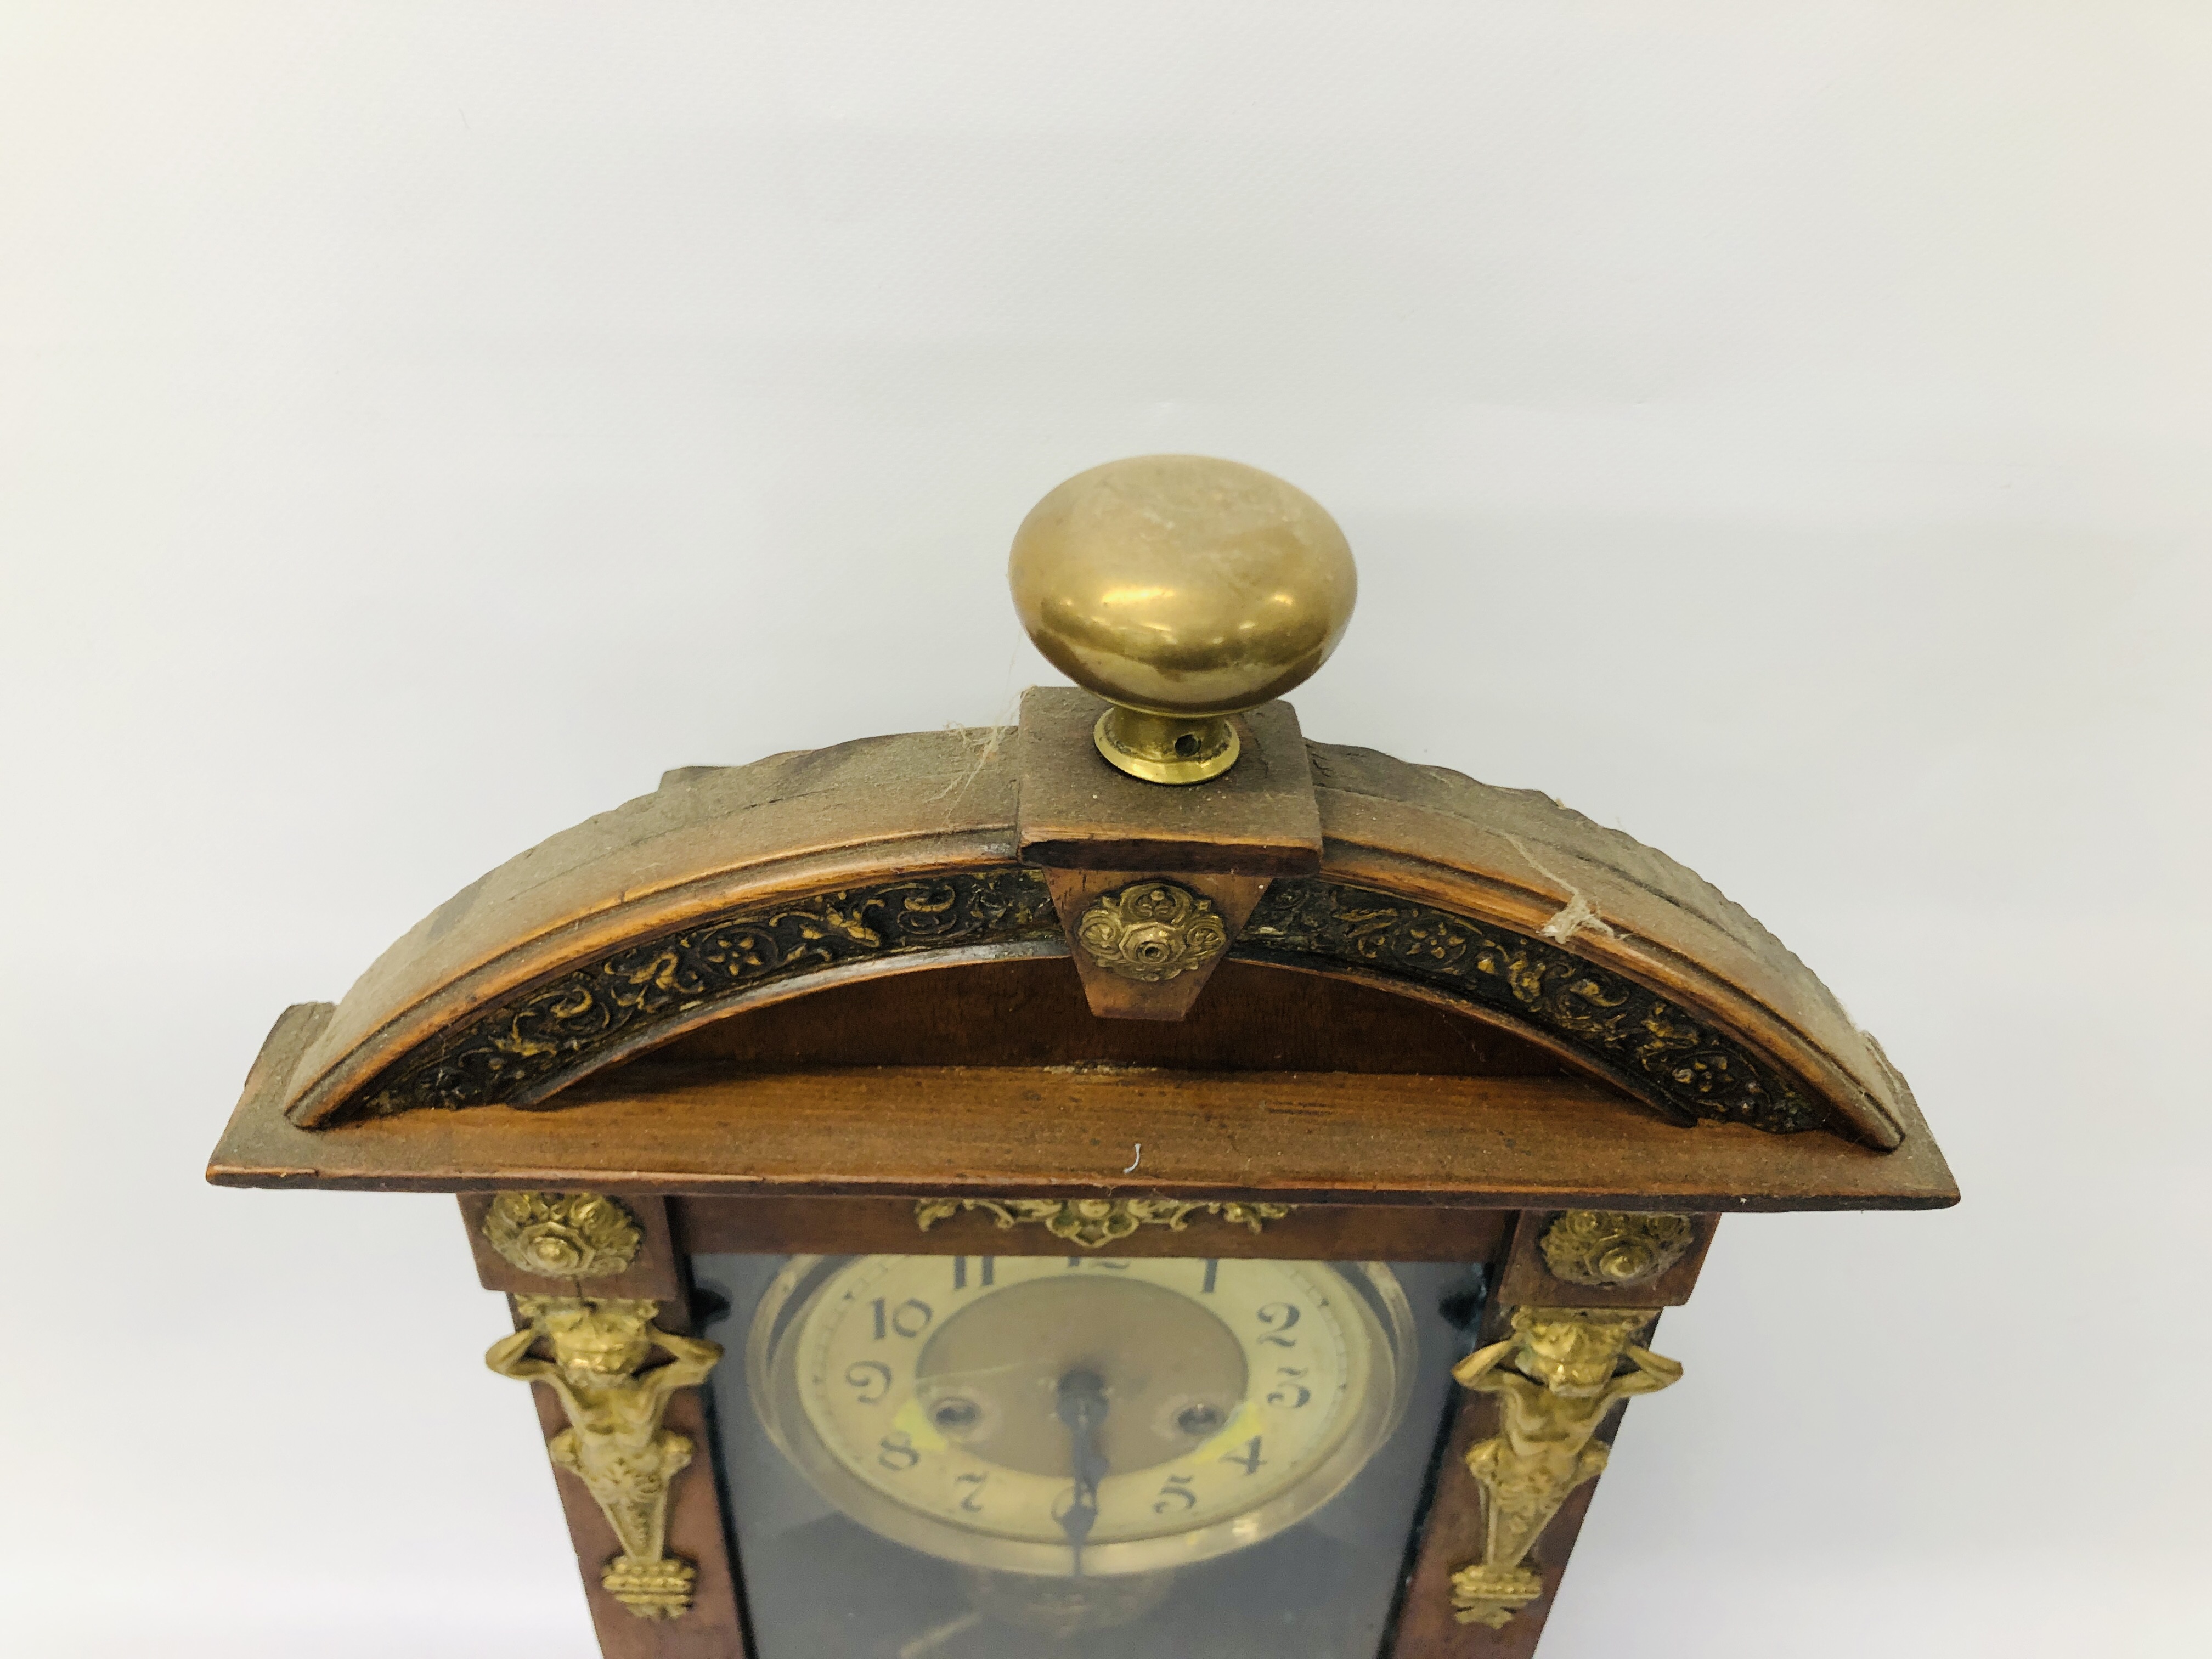 VINTAGE MAHOGANY CASED MANTEL CLOCK WITH APPLIED BRASS DETAIL - H 45CM. - Image 6 of 8